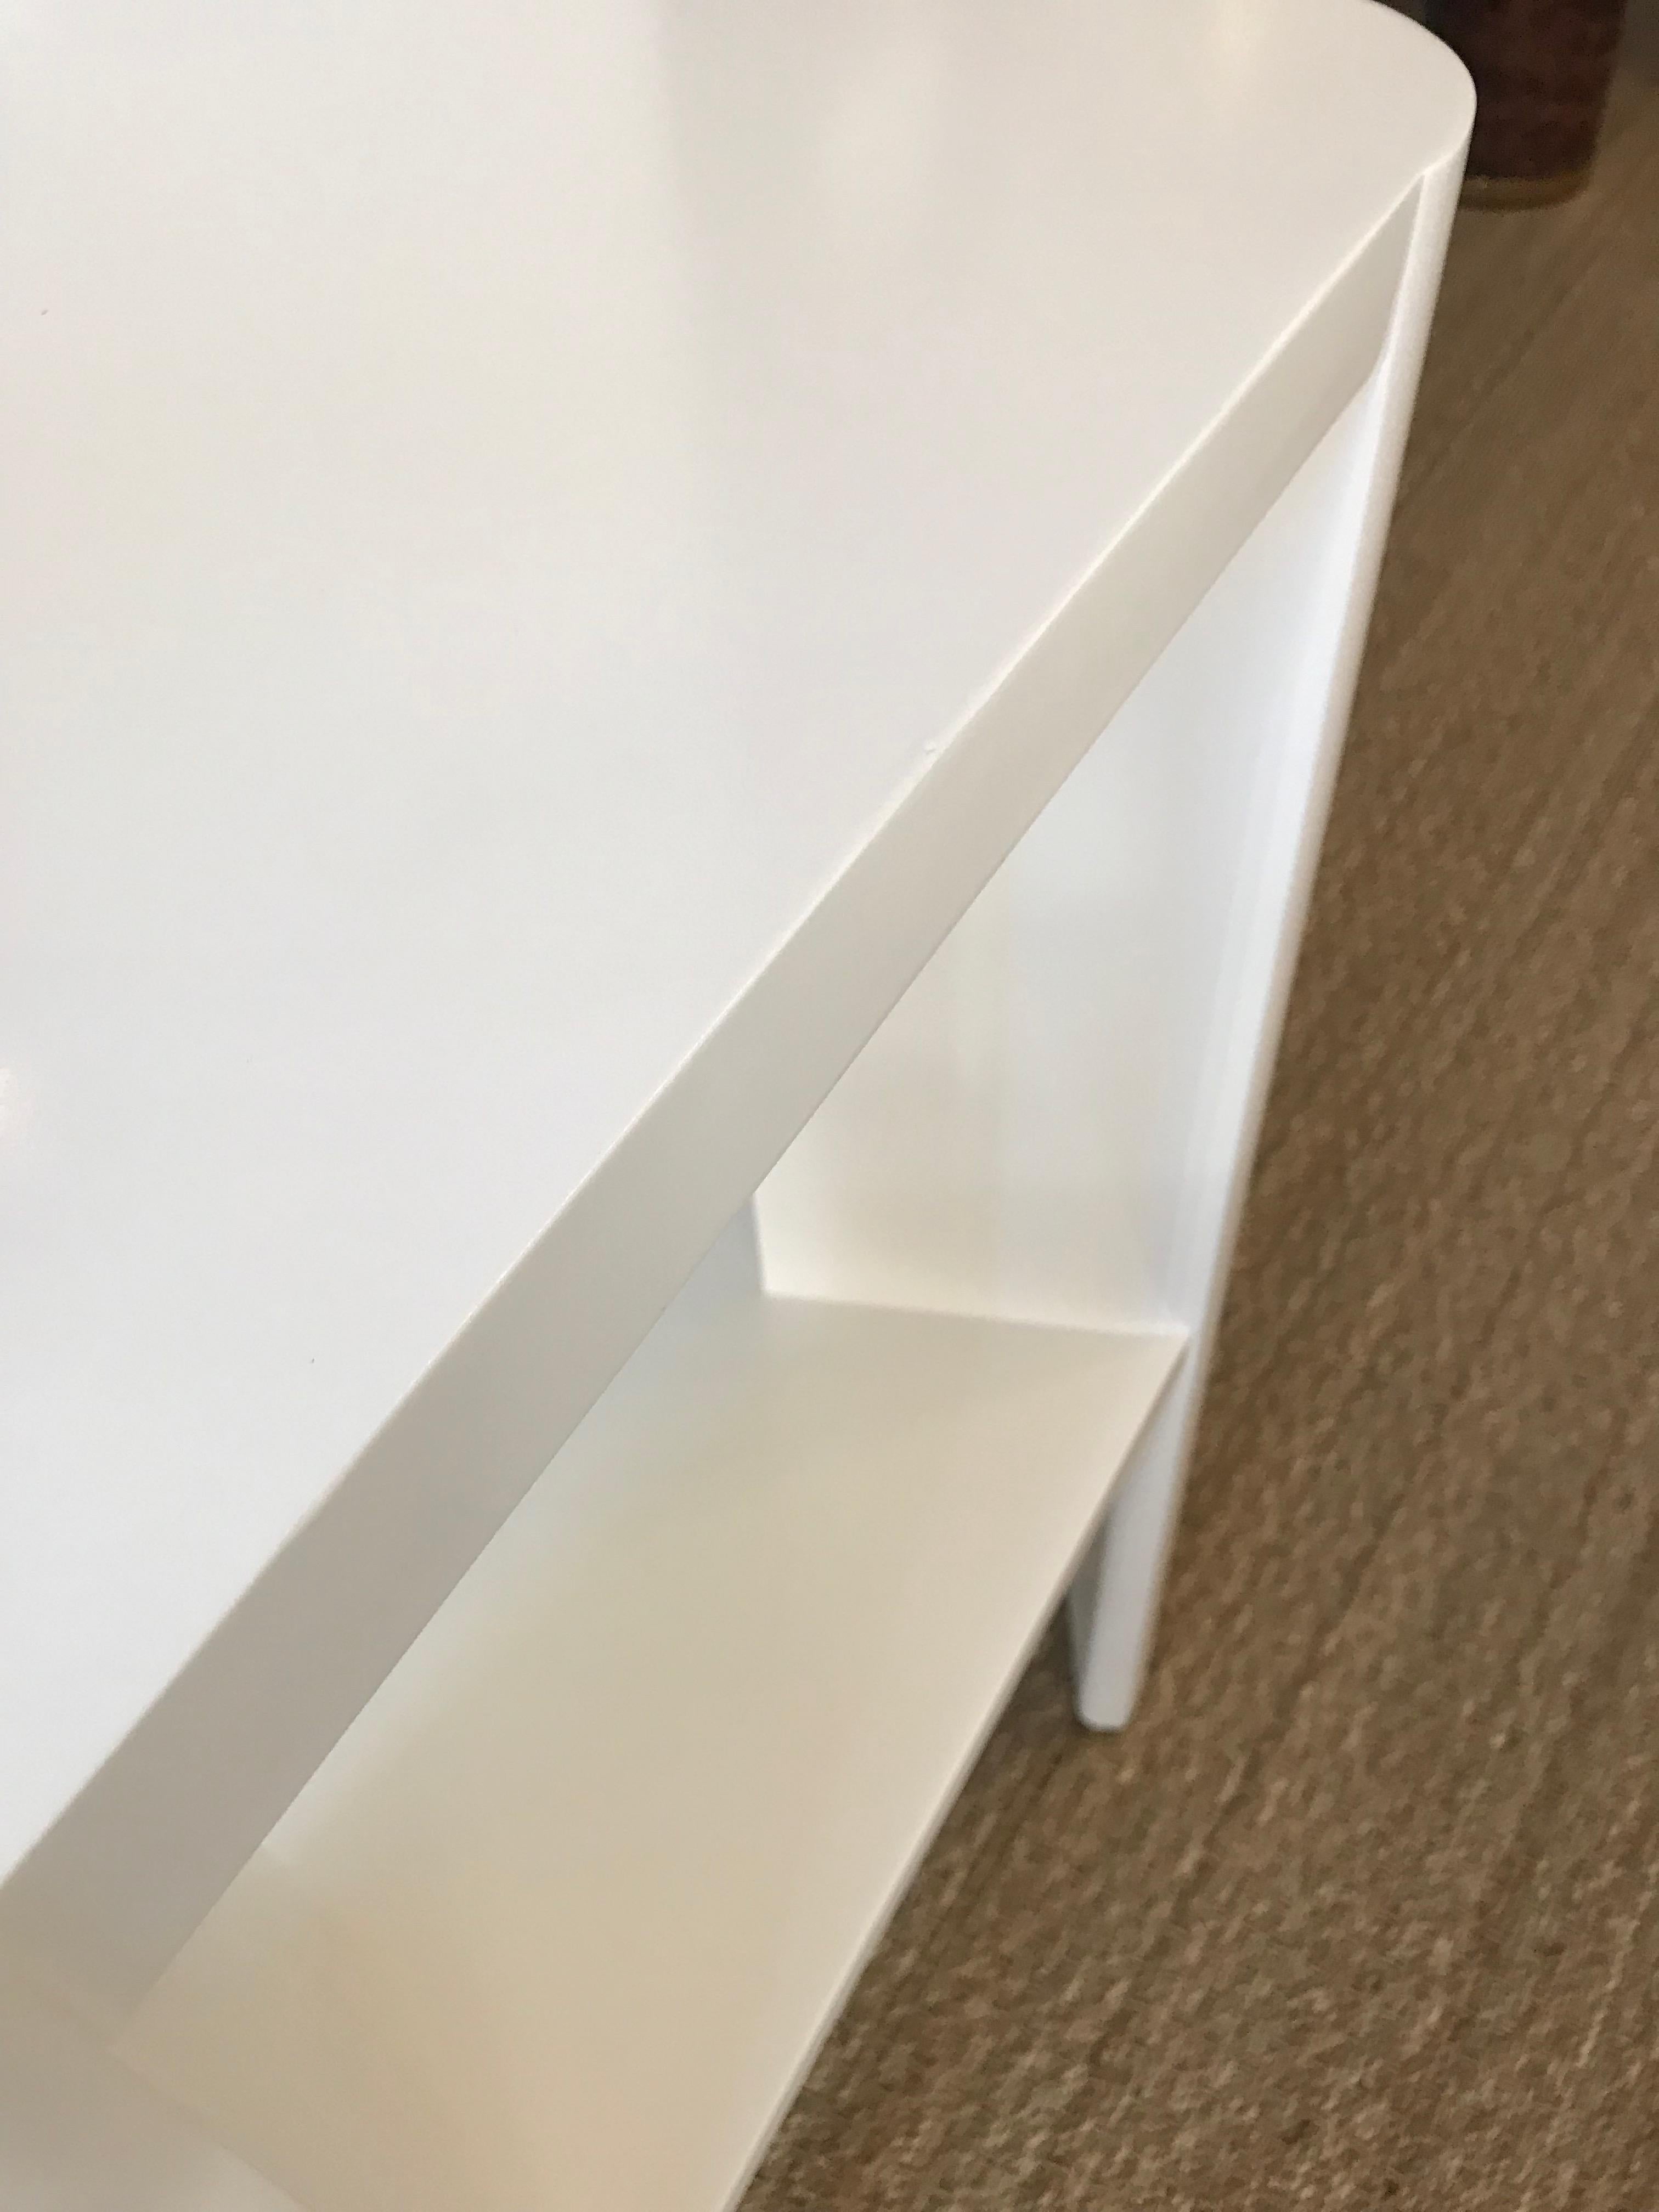 American Minimalist Modern Lacquered Library Table by Martin and Brockett, Shown in White